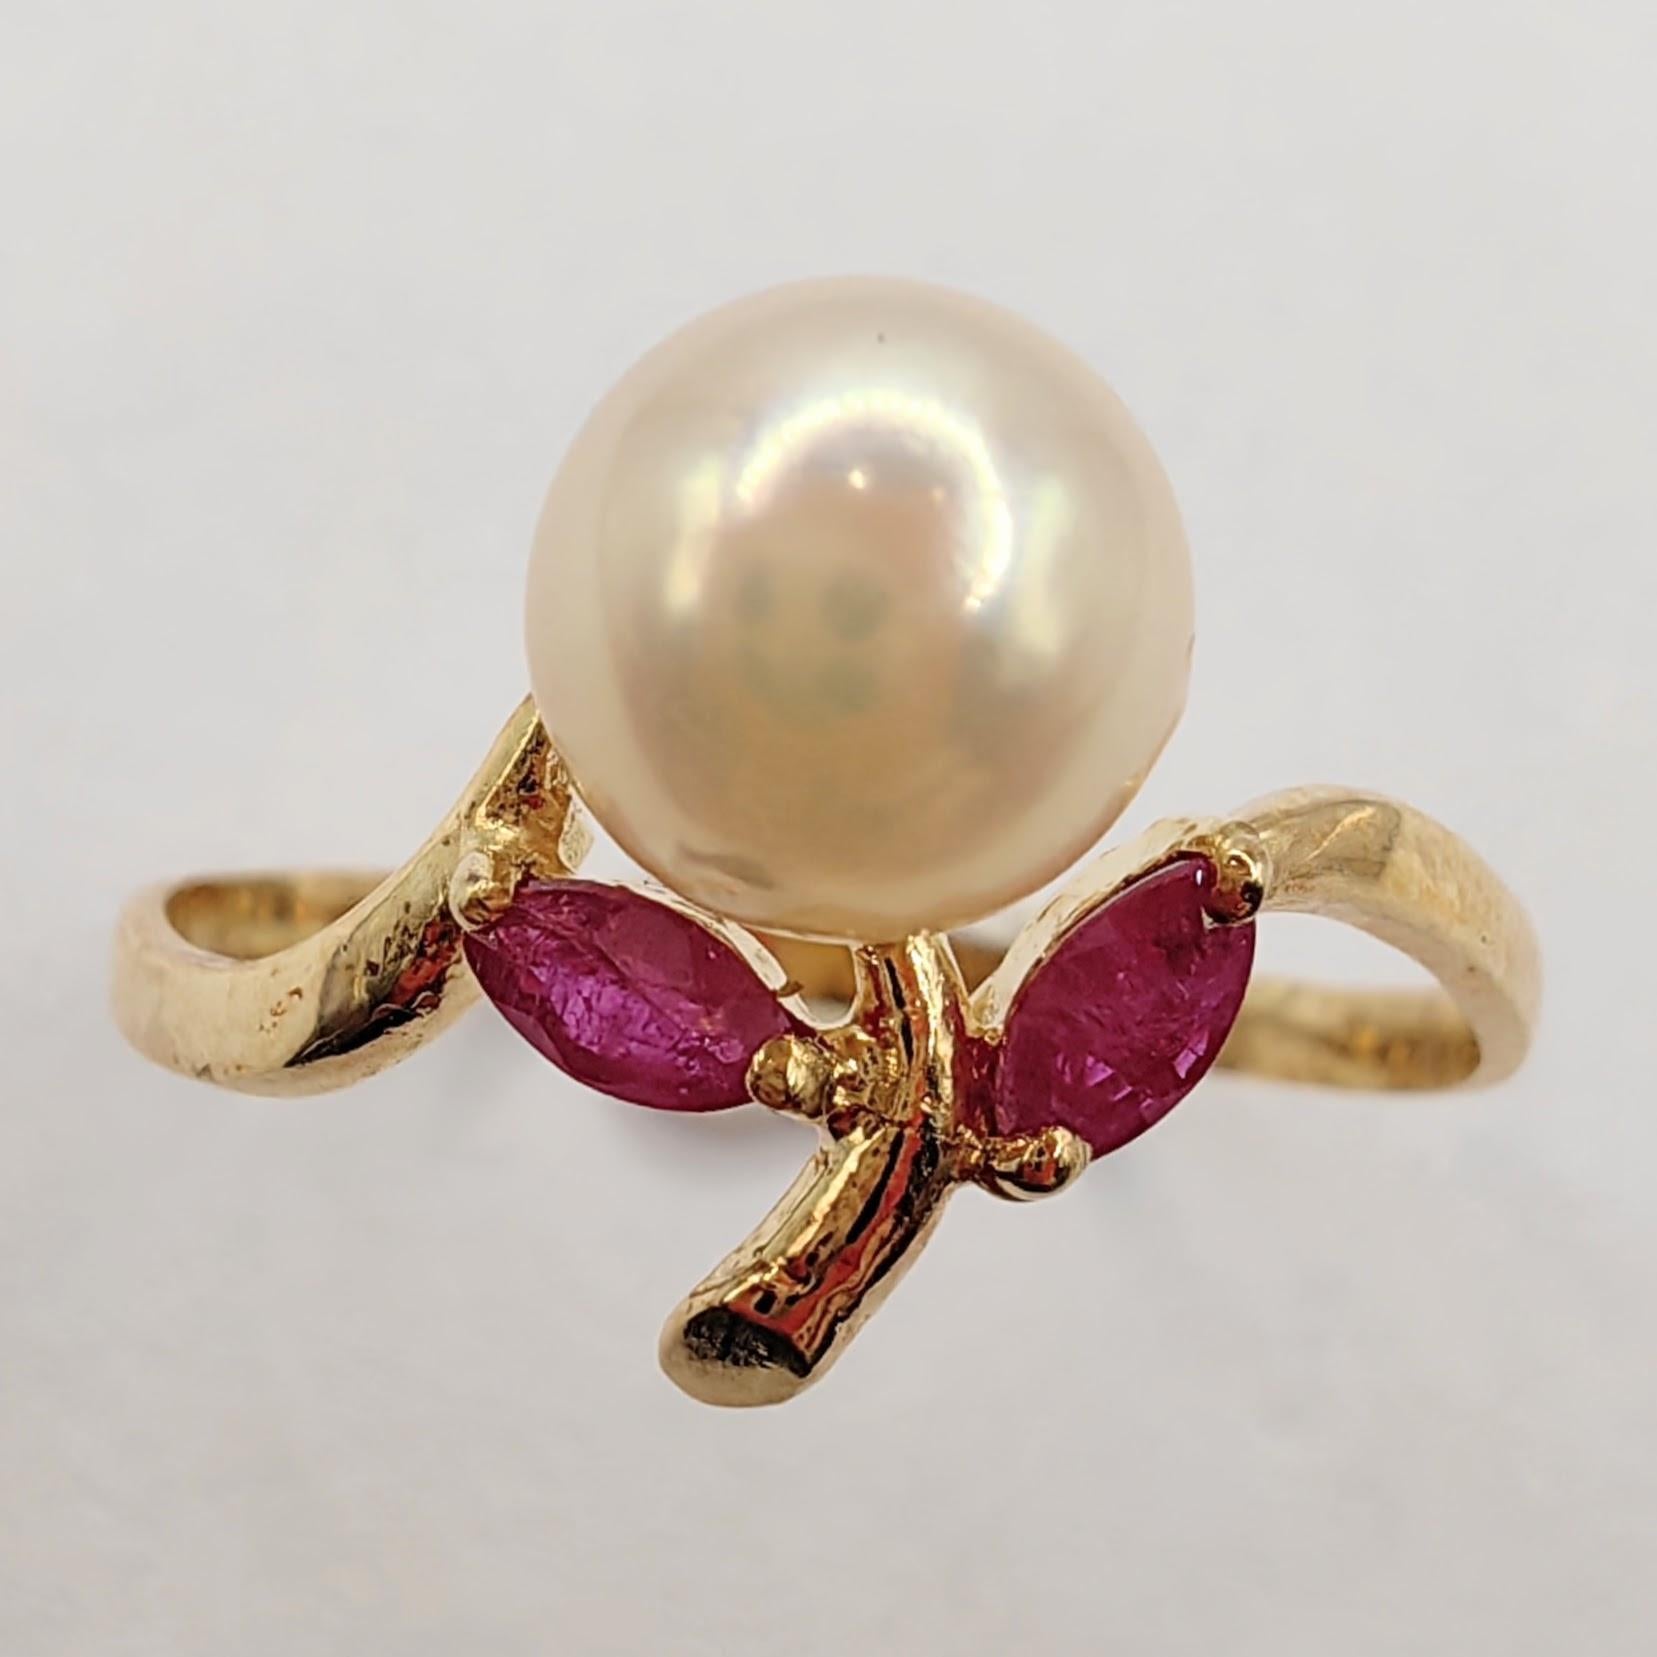 Introducing our Vintage Marquise Cut Rubies & Pearl Ring, Pendant, and Earrings Set in 14K Yellow Gold, a collection that masterfully combines classic charm with a contemporary touch.

Central to each piece in this set is a radiant Freshwater